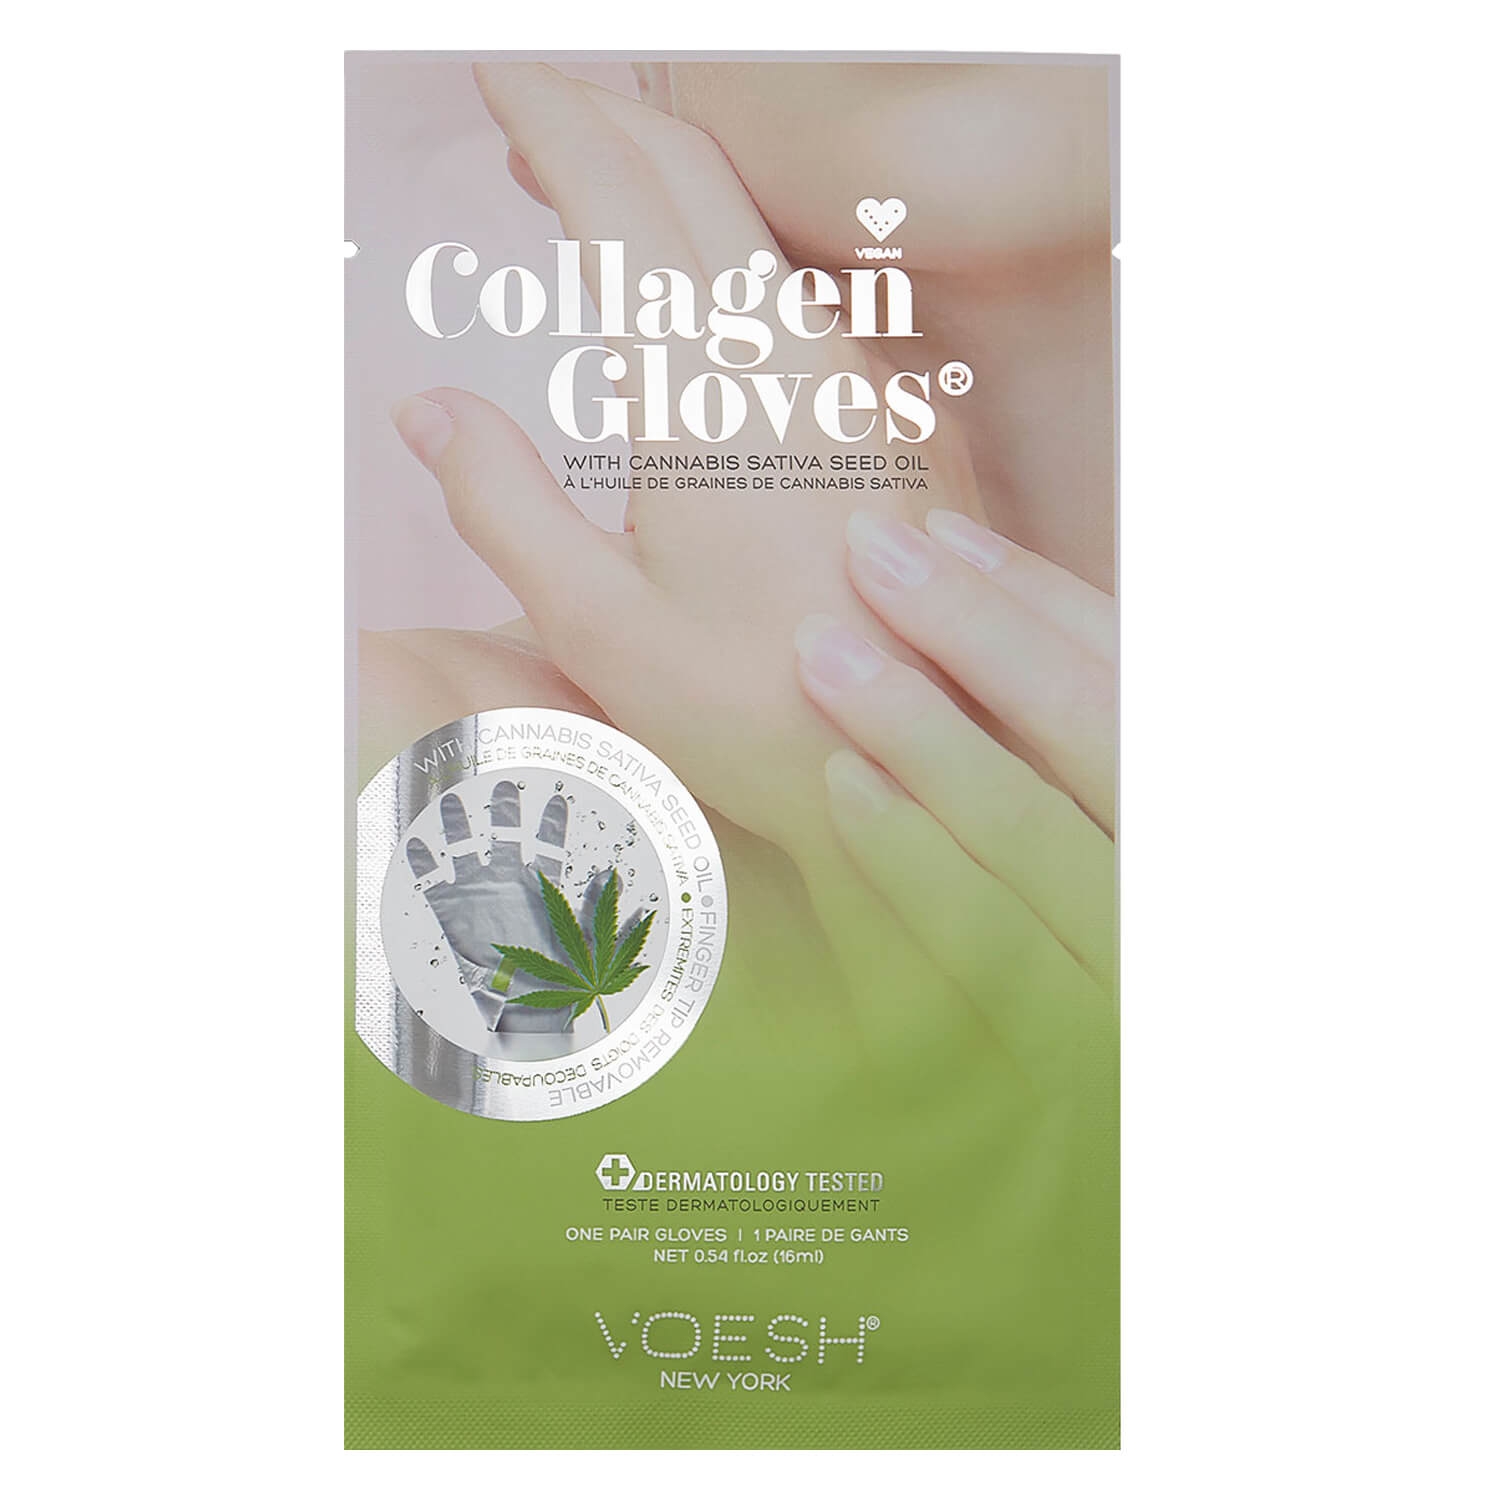 Product image from VOESH New York - Collagen Gloves Cannabis Seed Oil